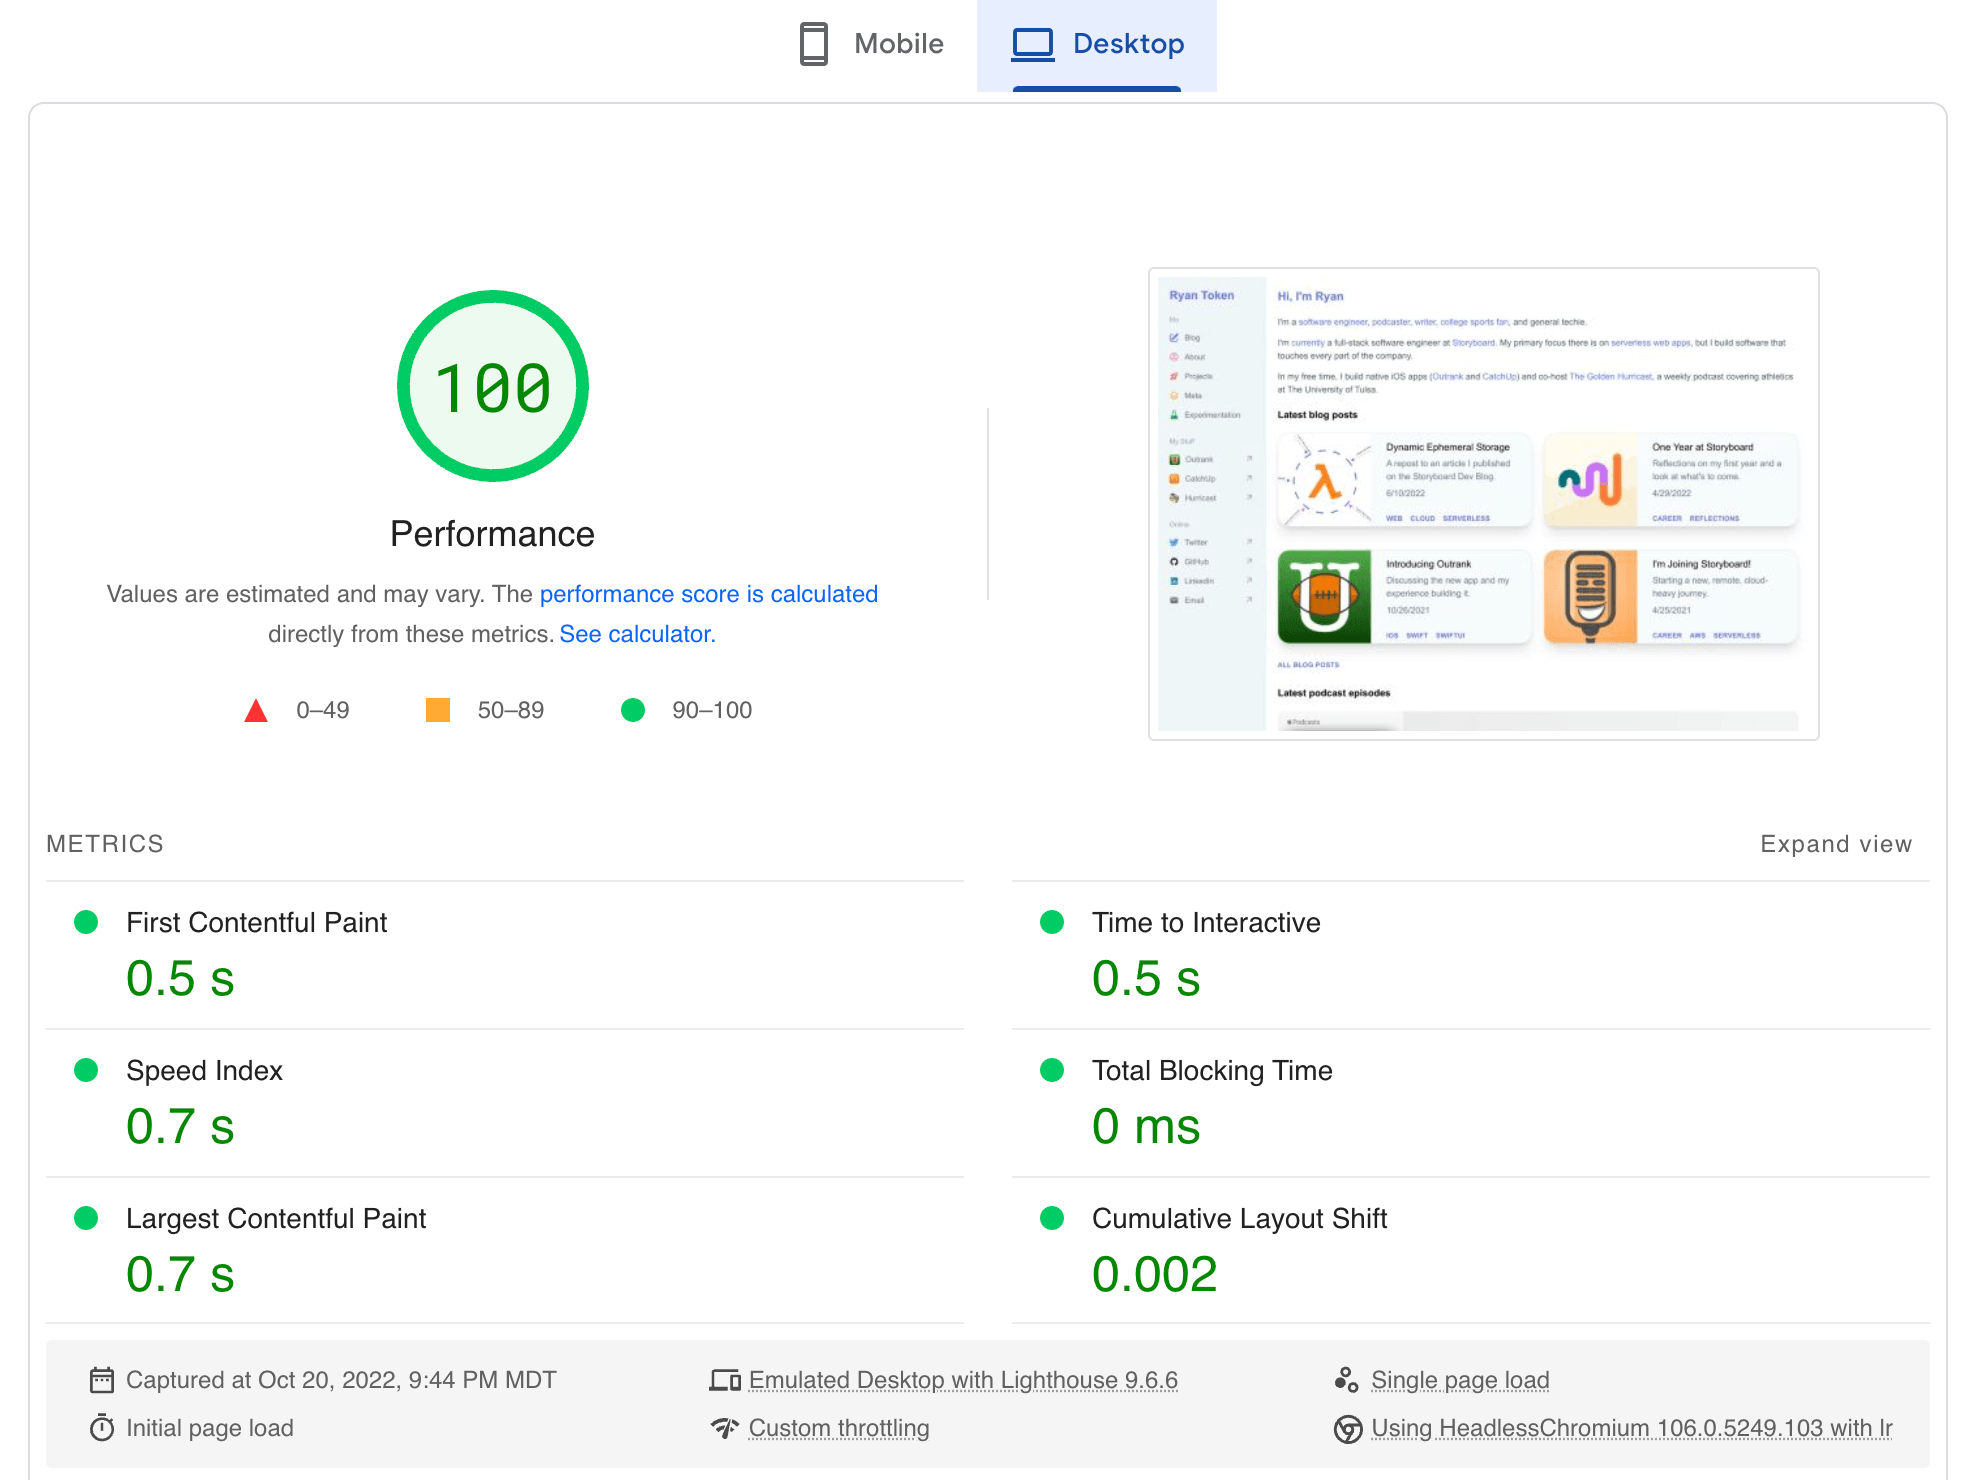 PageSpeed Insights scores for the Nuxt 3 site on desktop